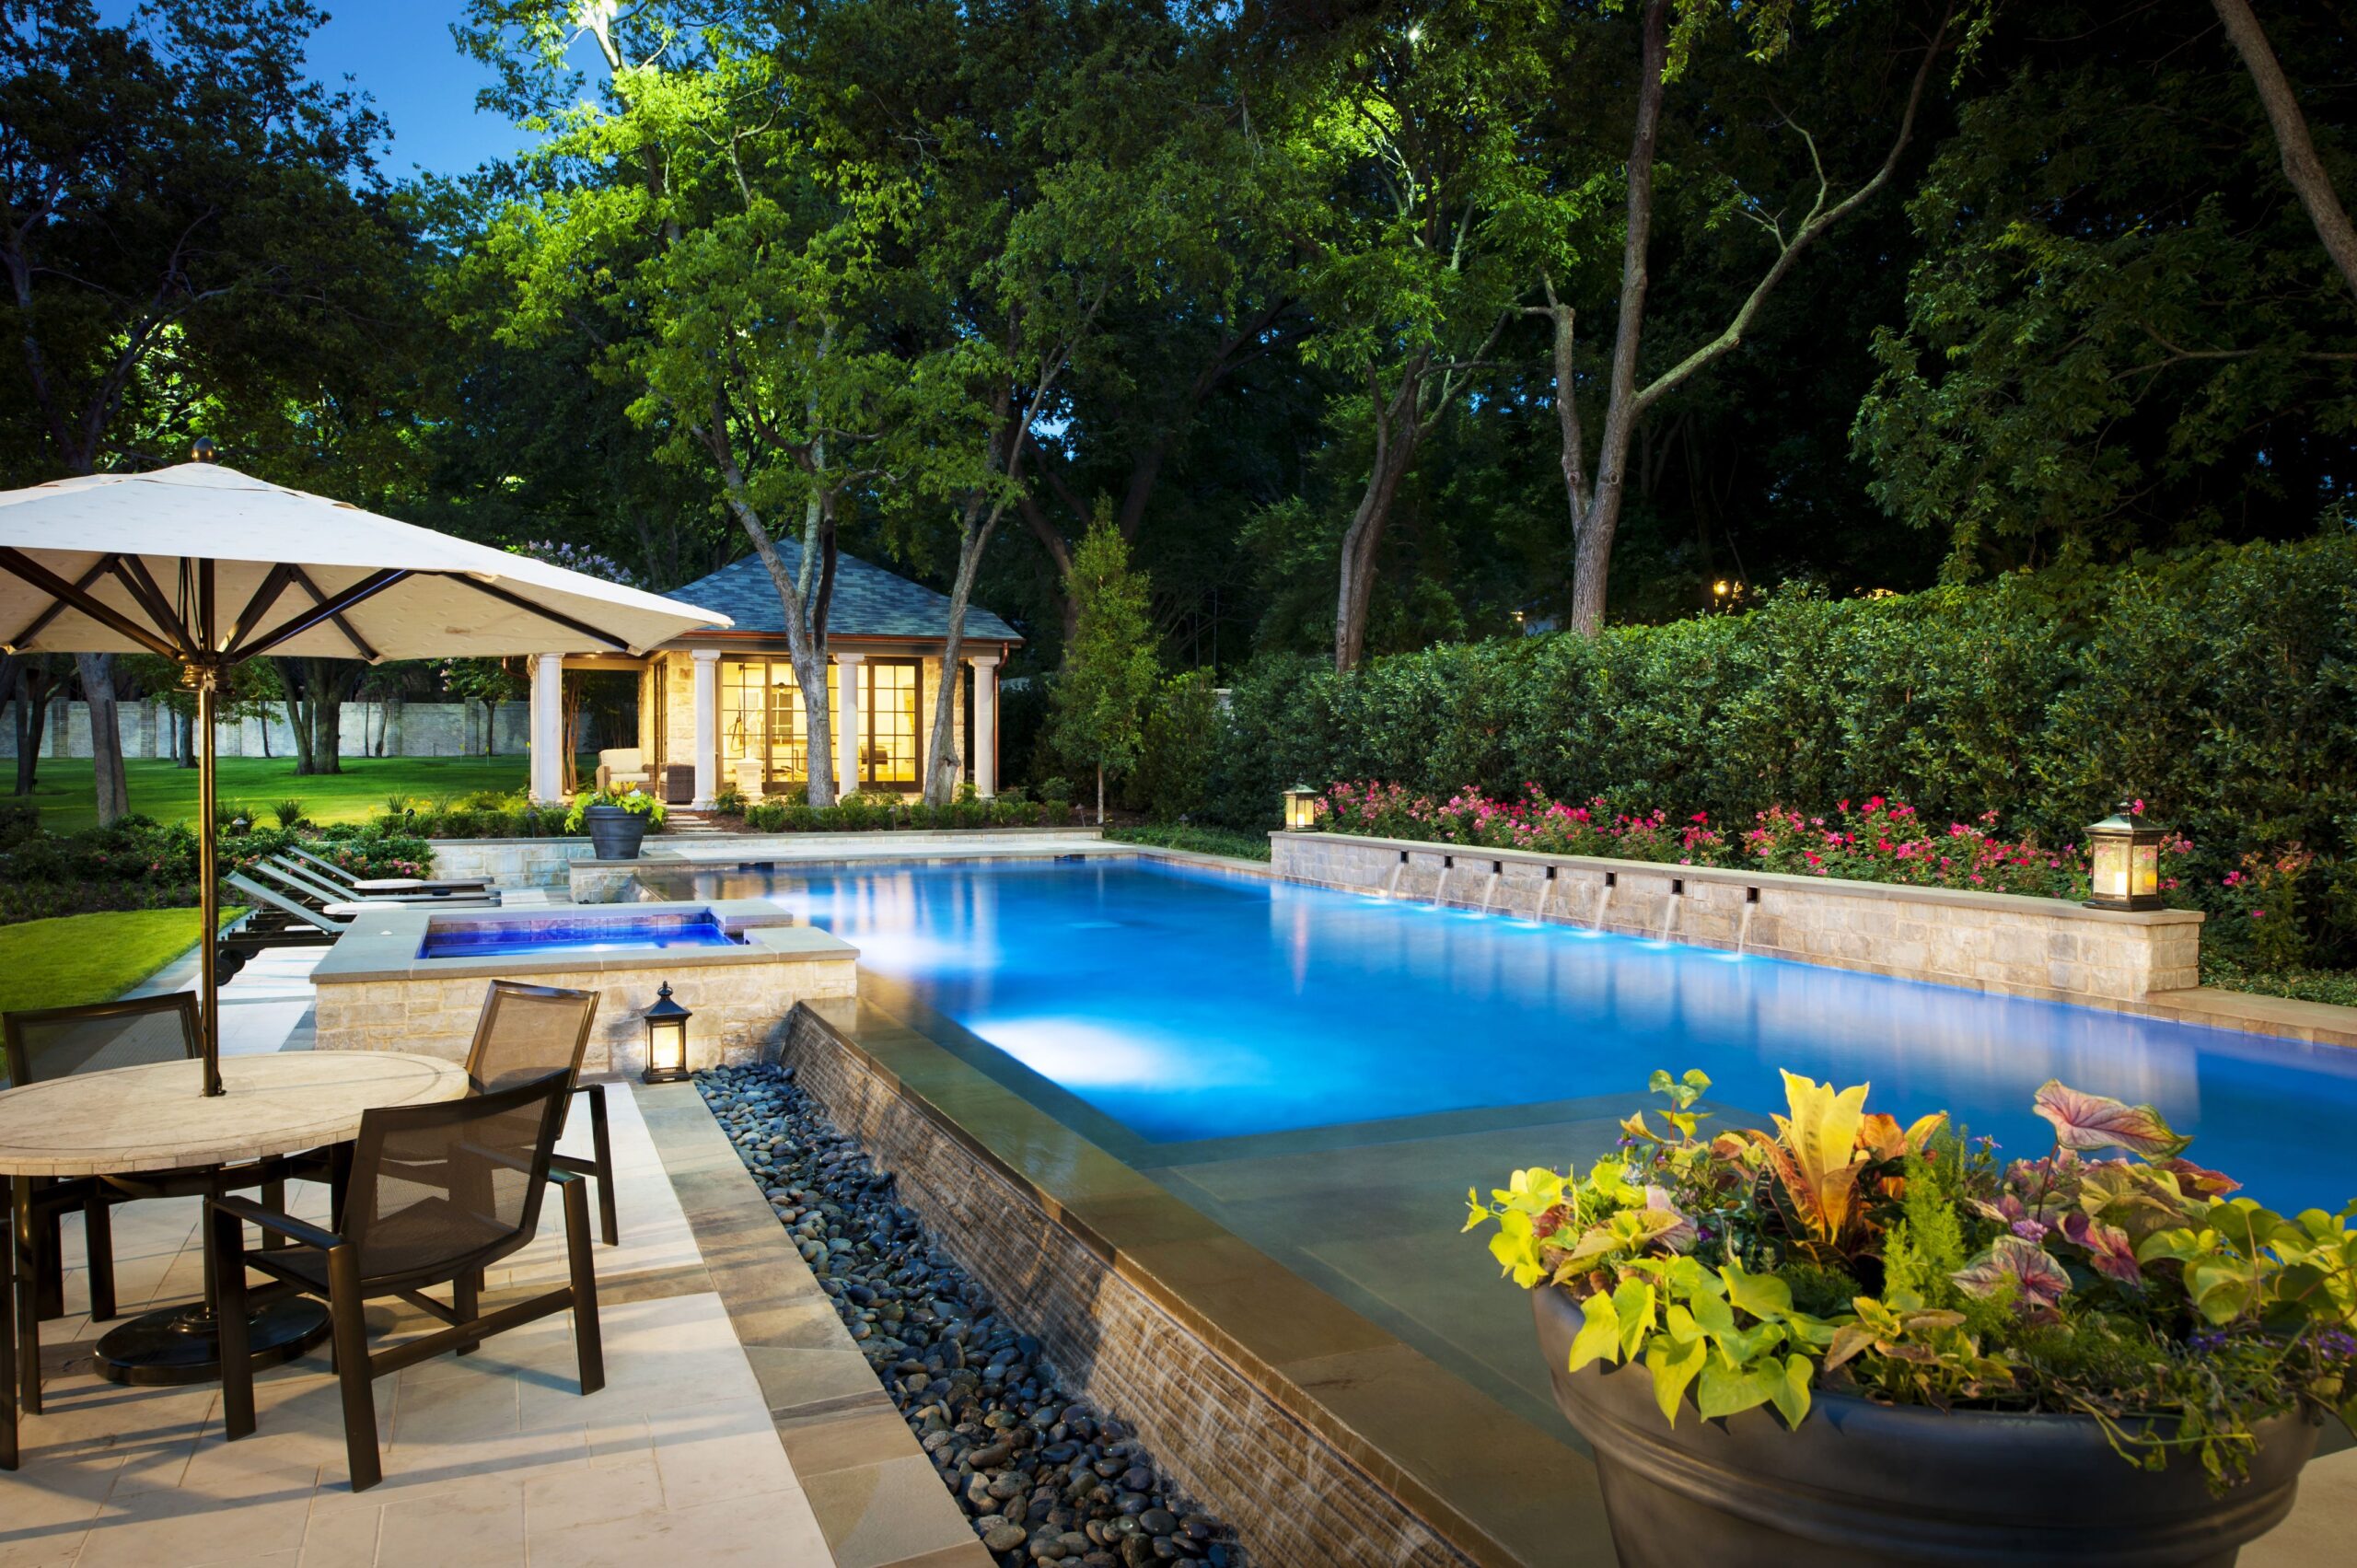 Creating Your Private Retreat: Pool Construction and Design Ideas